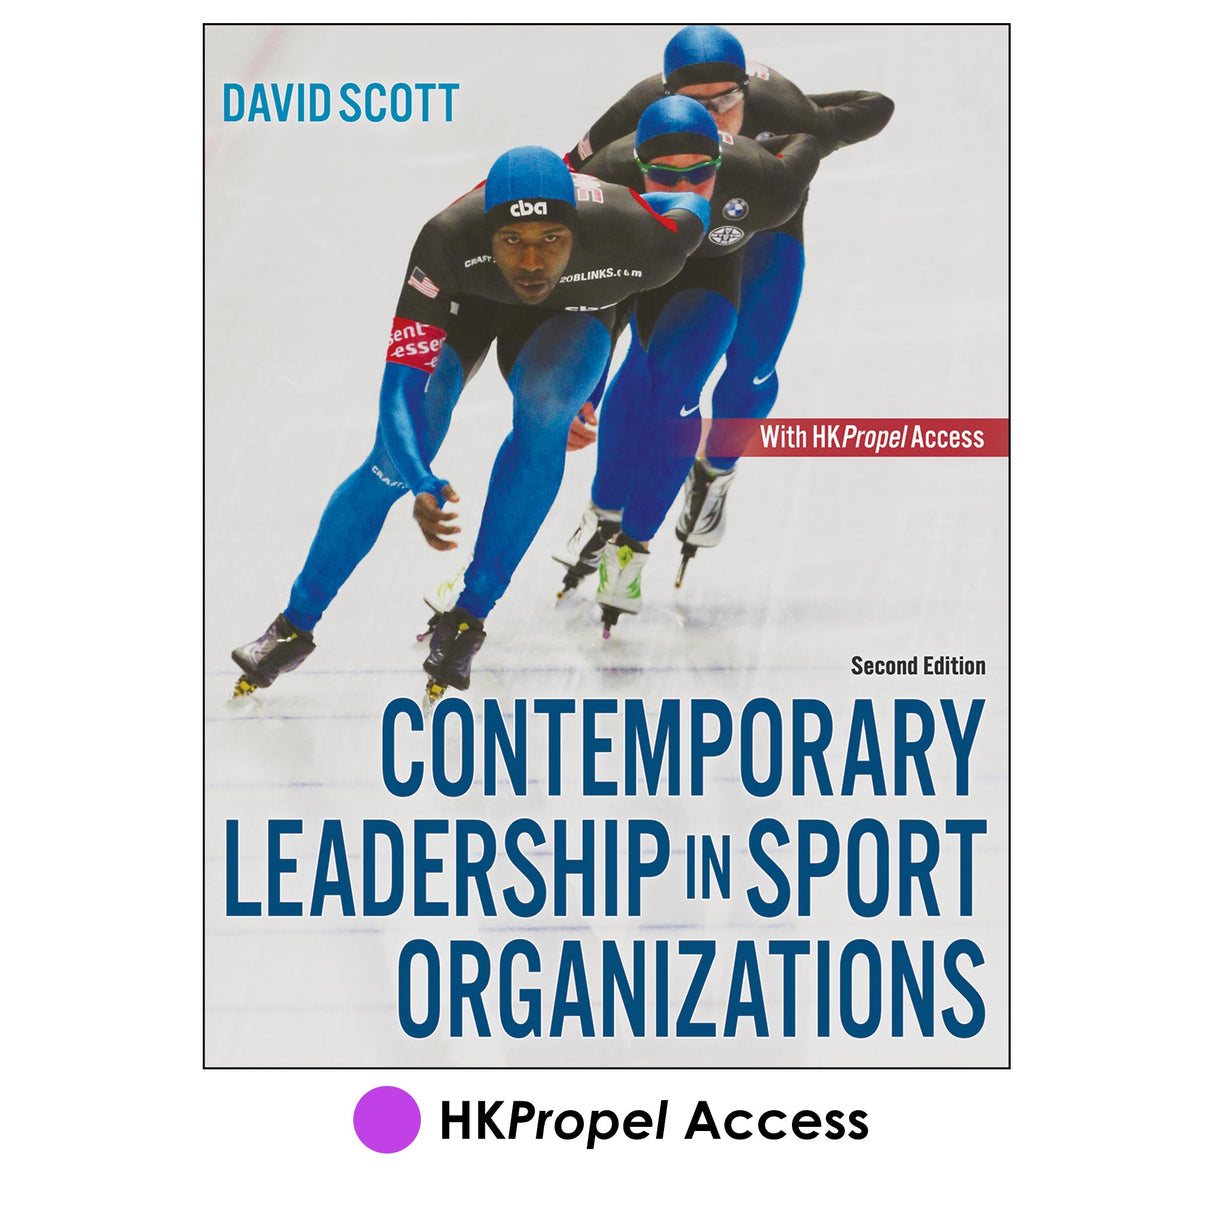 Contemporary Leadership in Sport Organizations 2nd Edition HKPropel Access